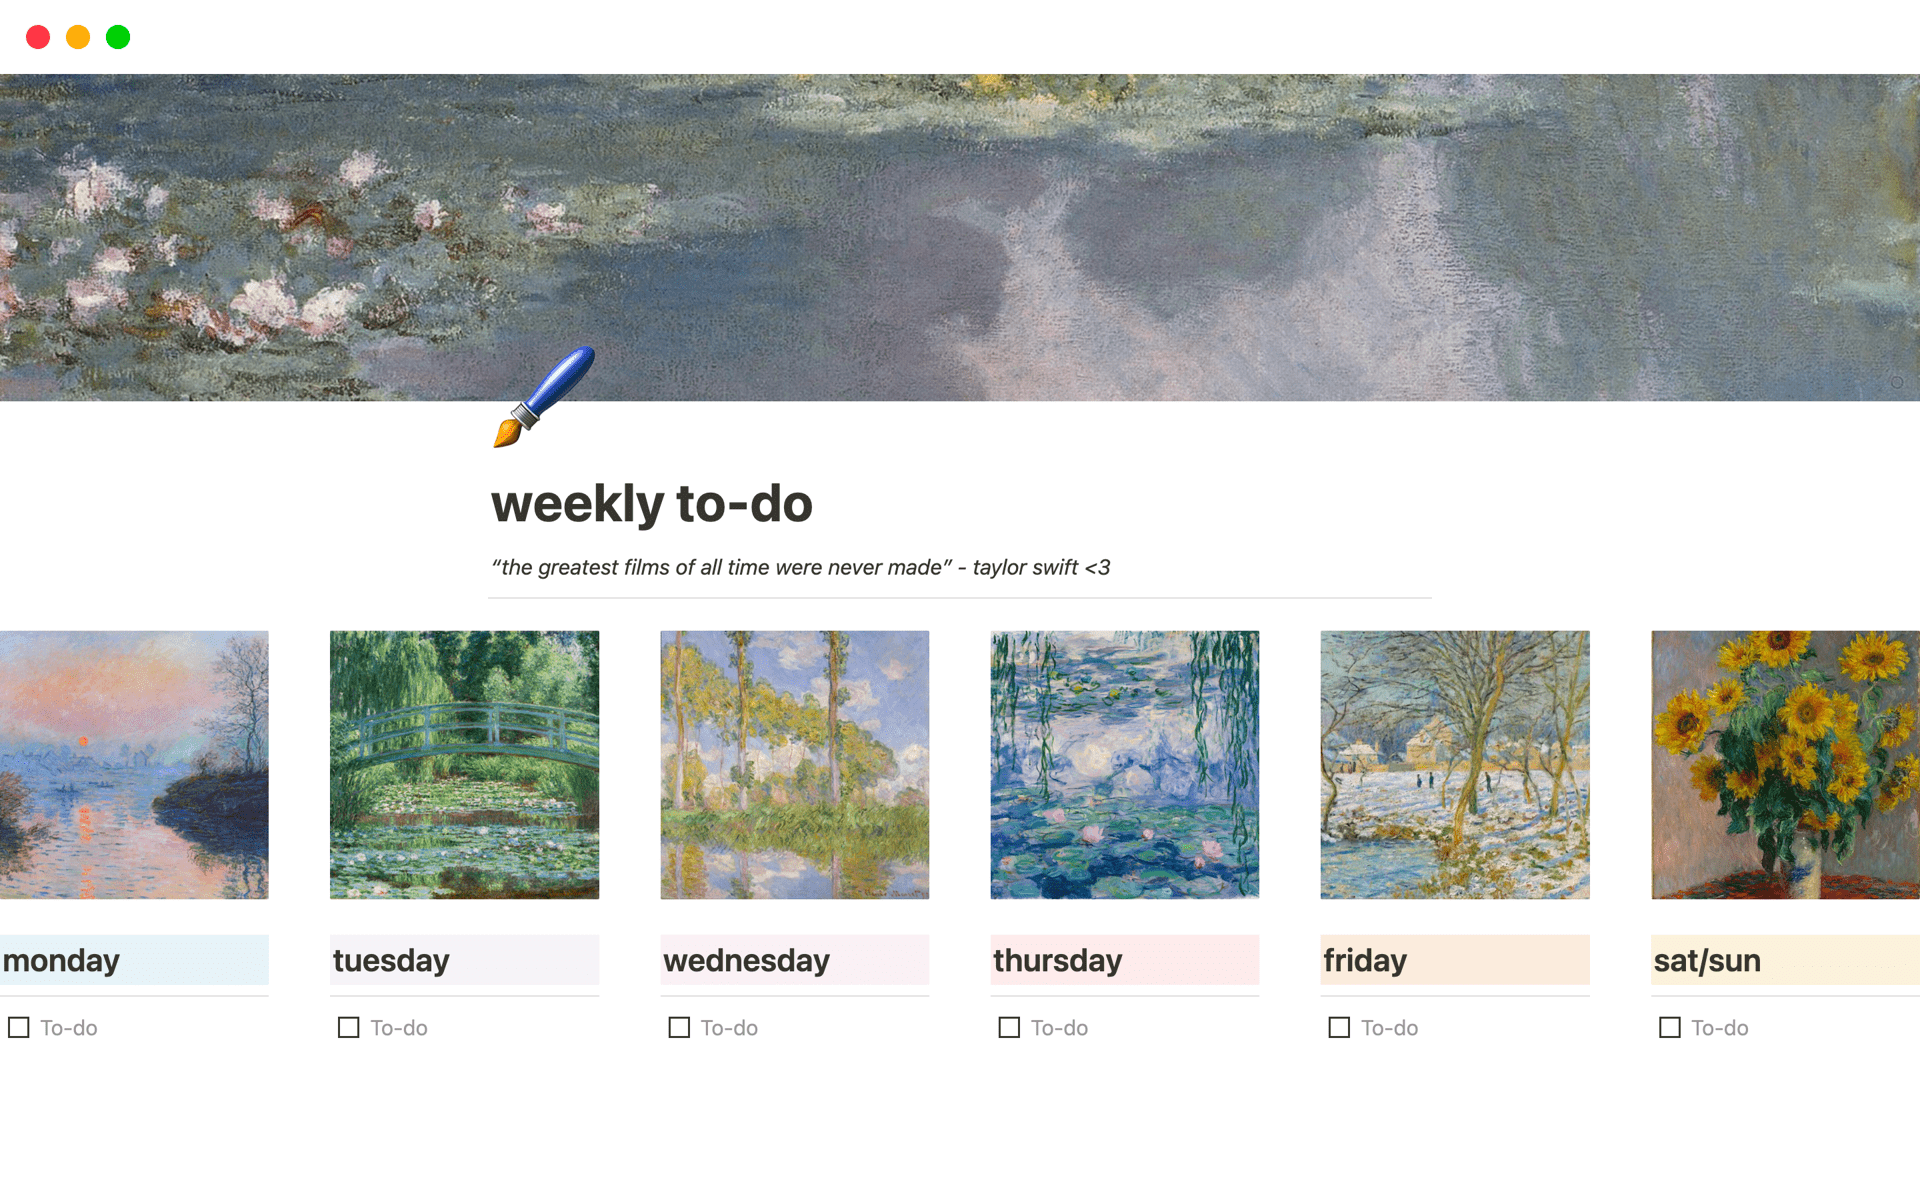 an artistic weekly to-do with Monet paintings <3